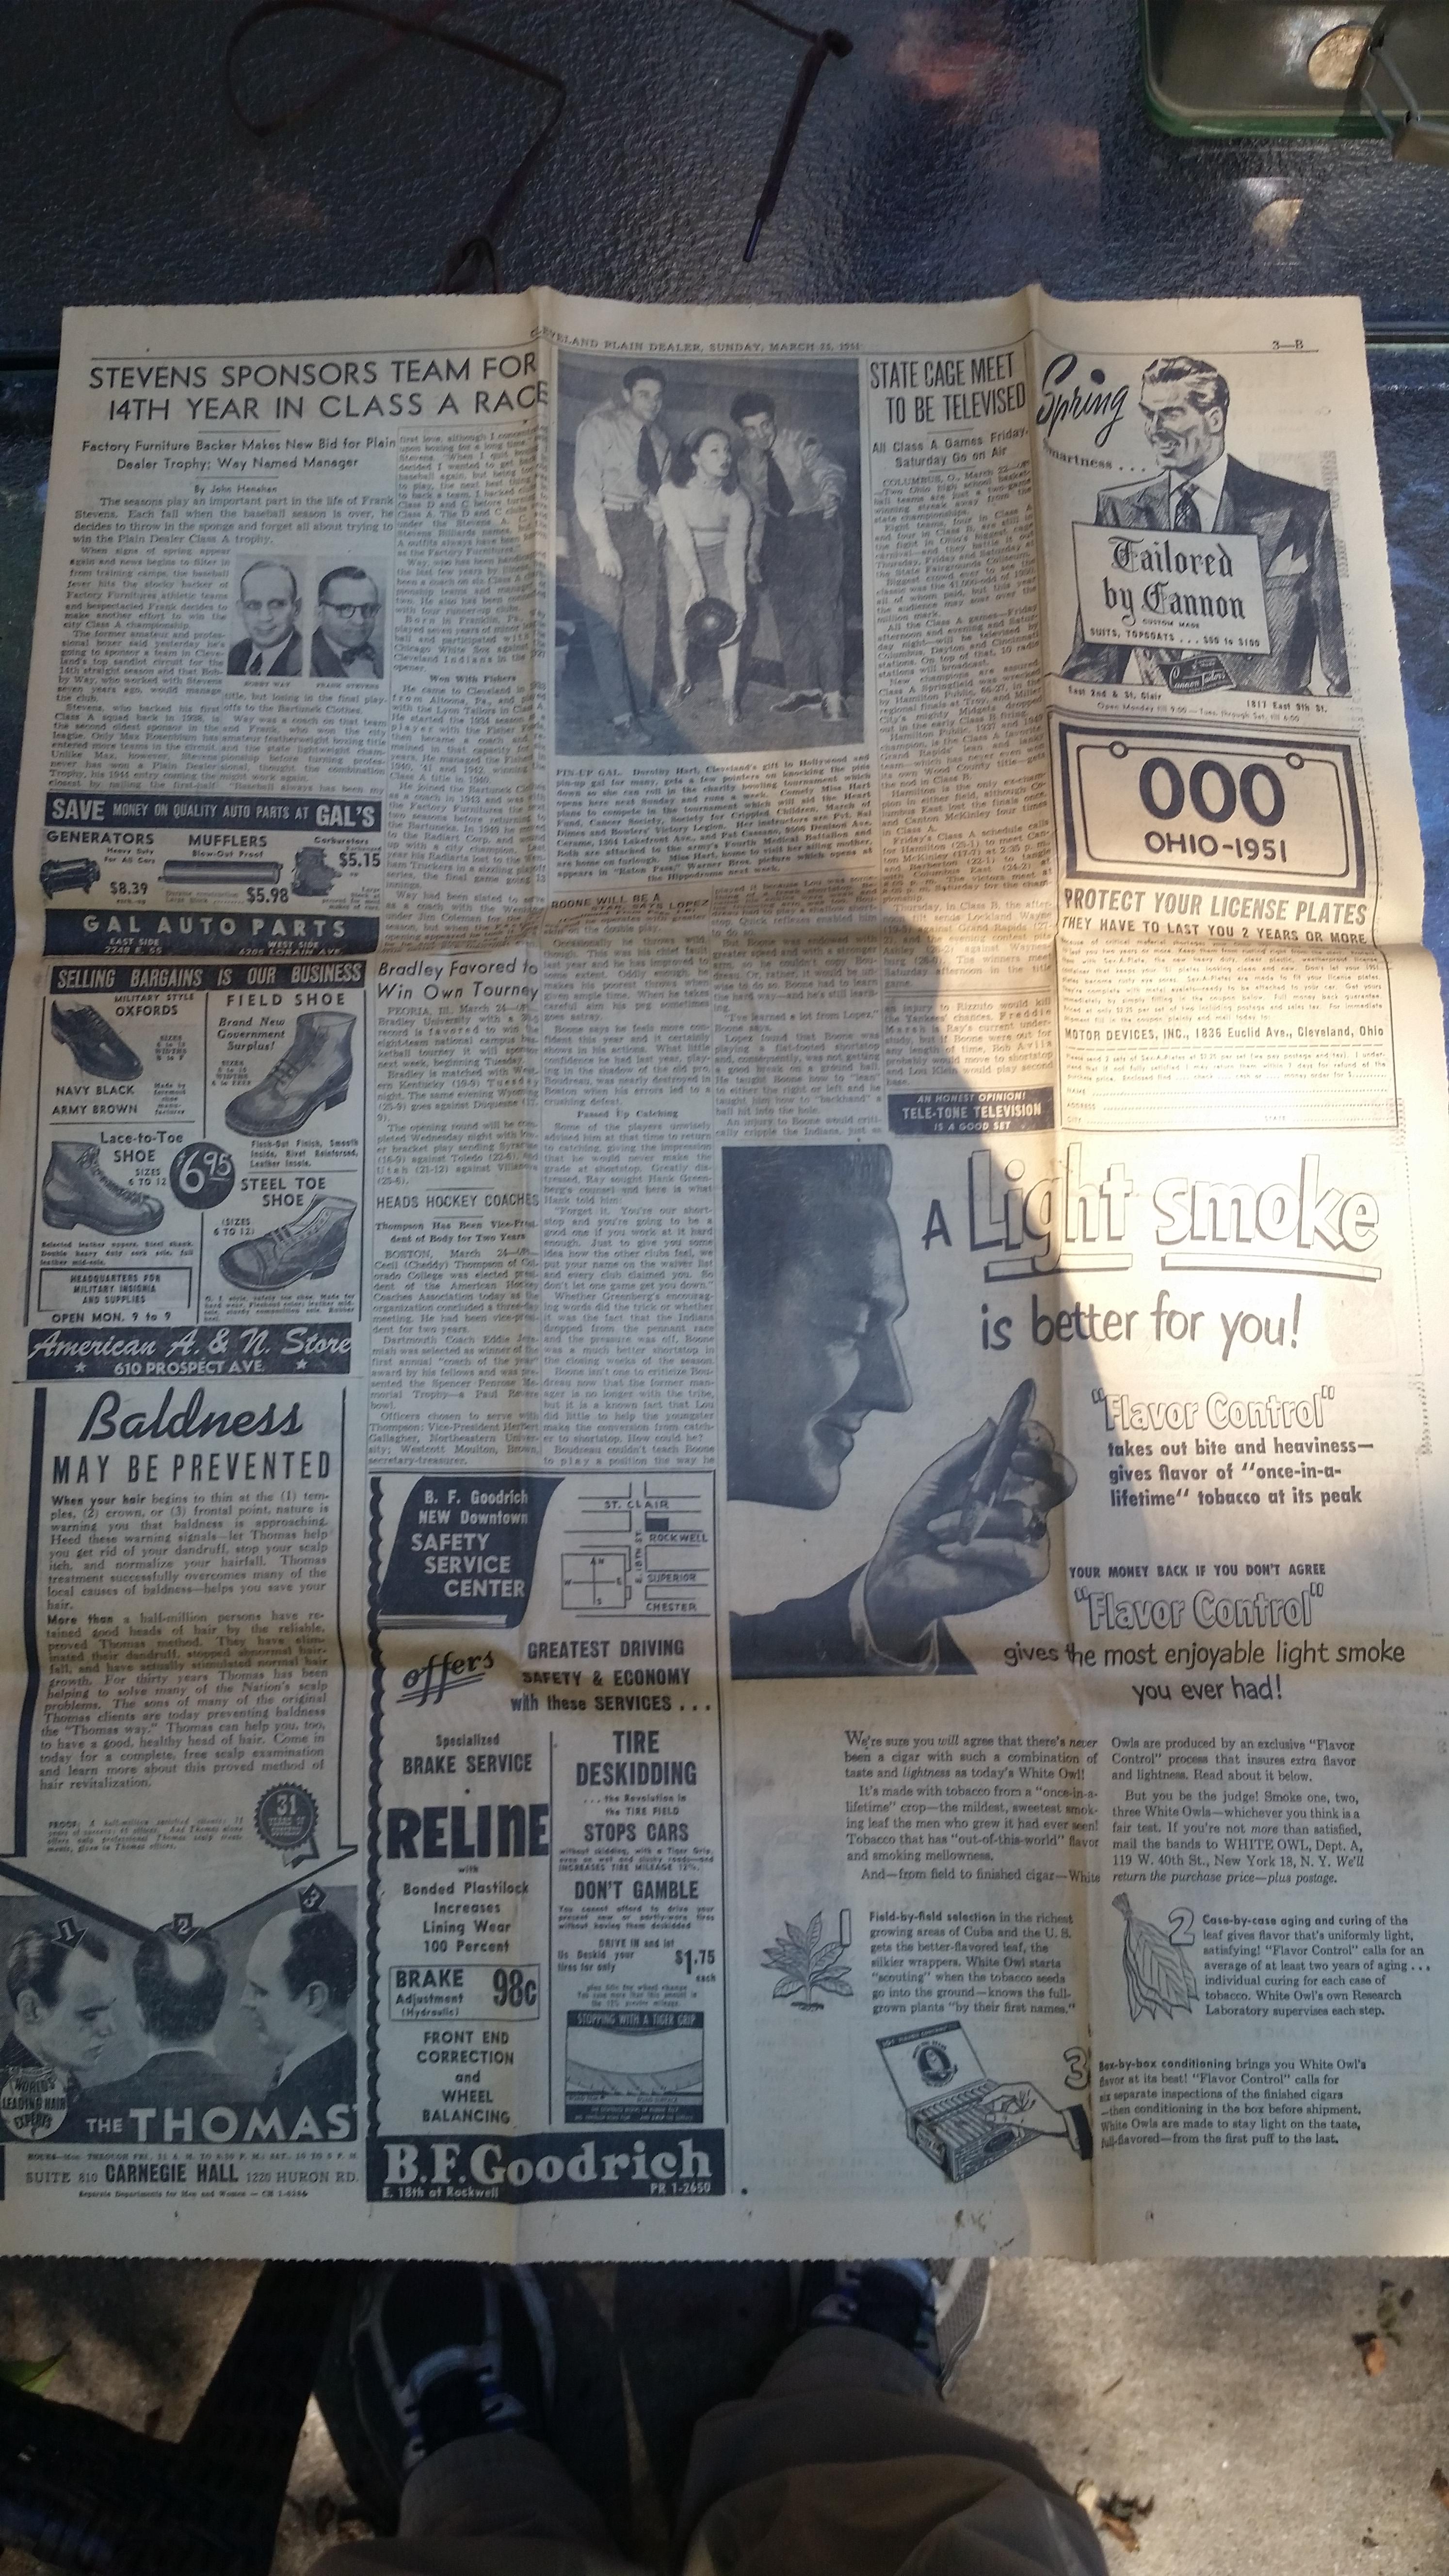 Picture of the newspaper found inside the discovered suitcase  | Source: Imgur/branik12